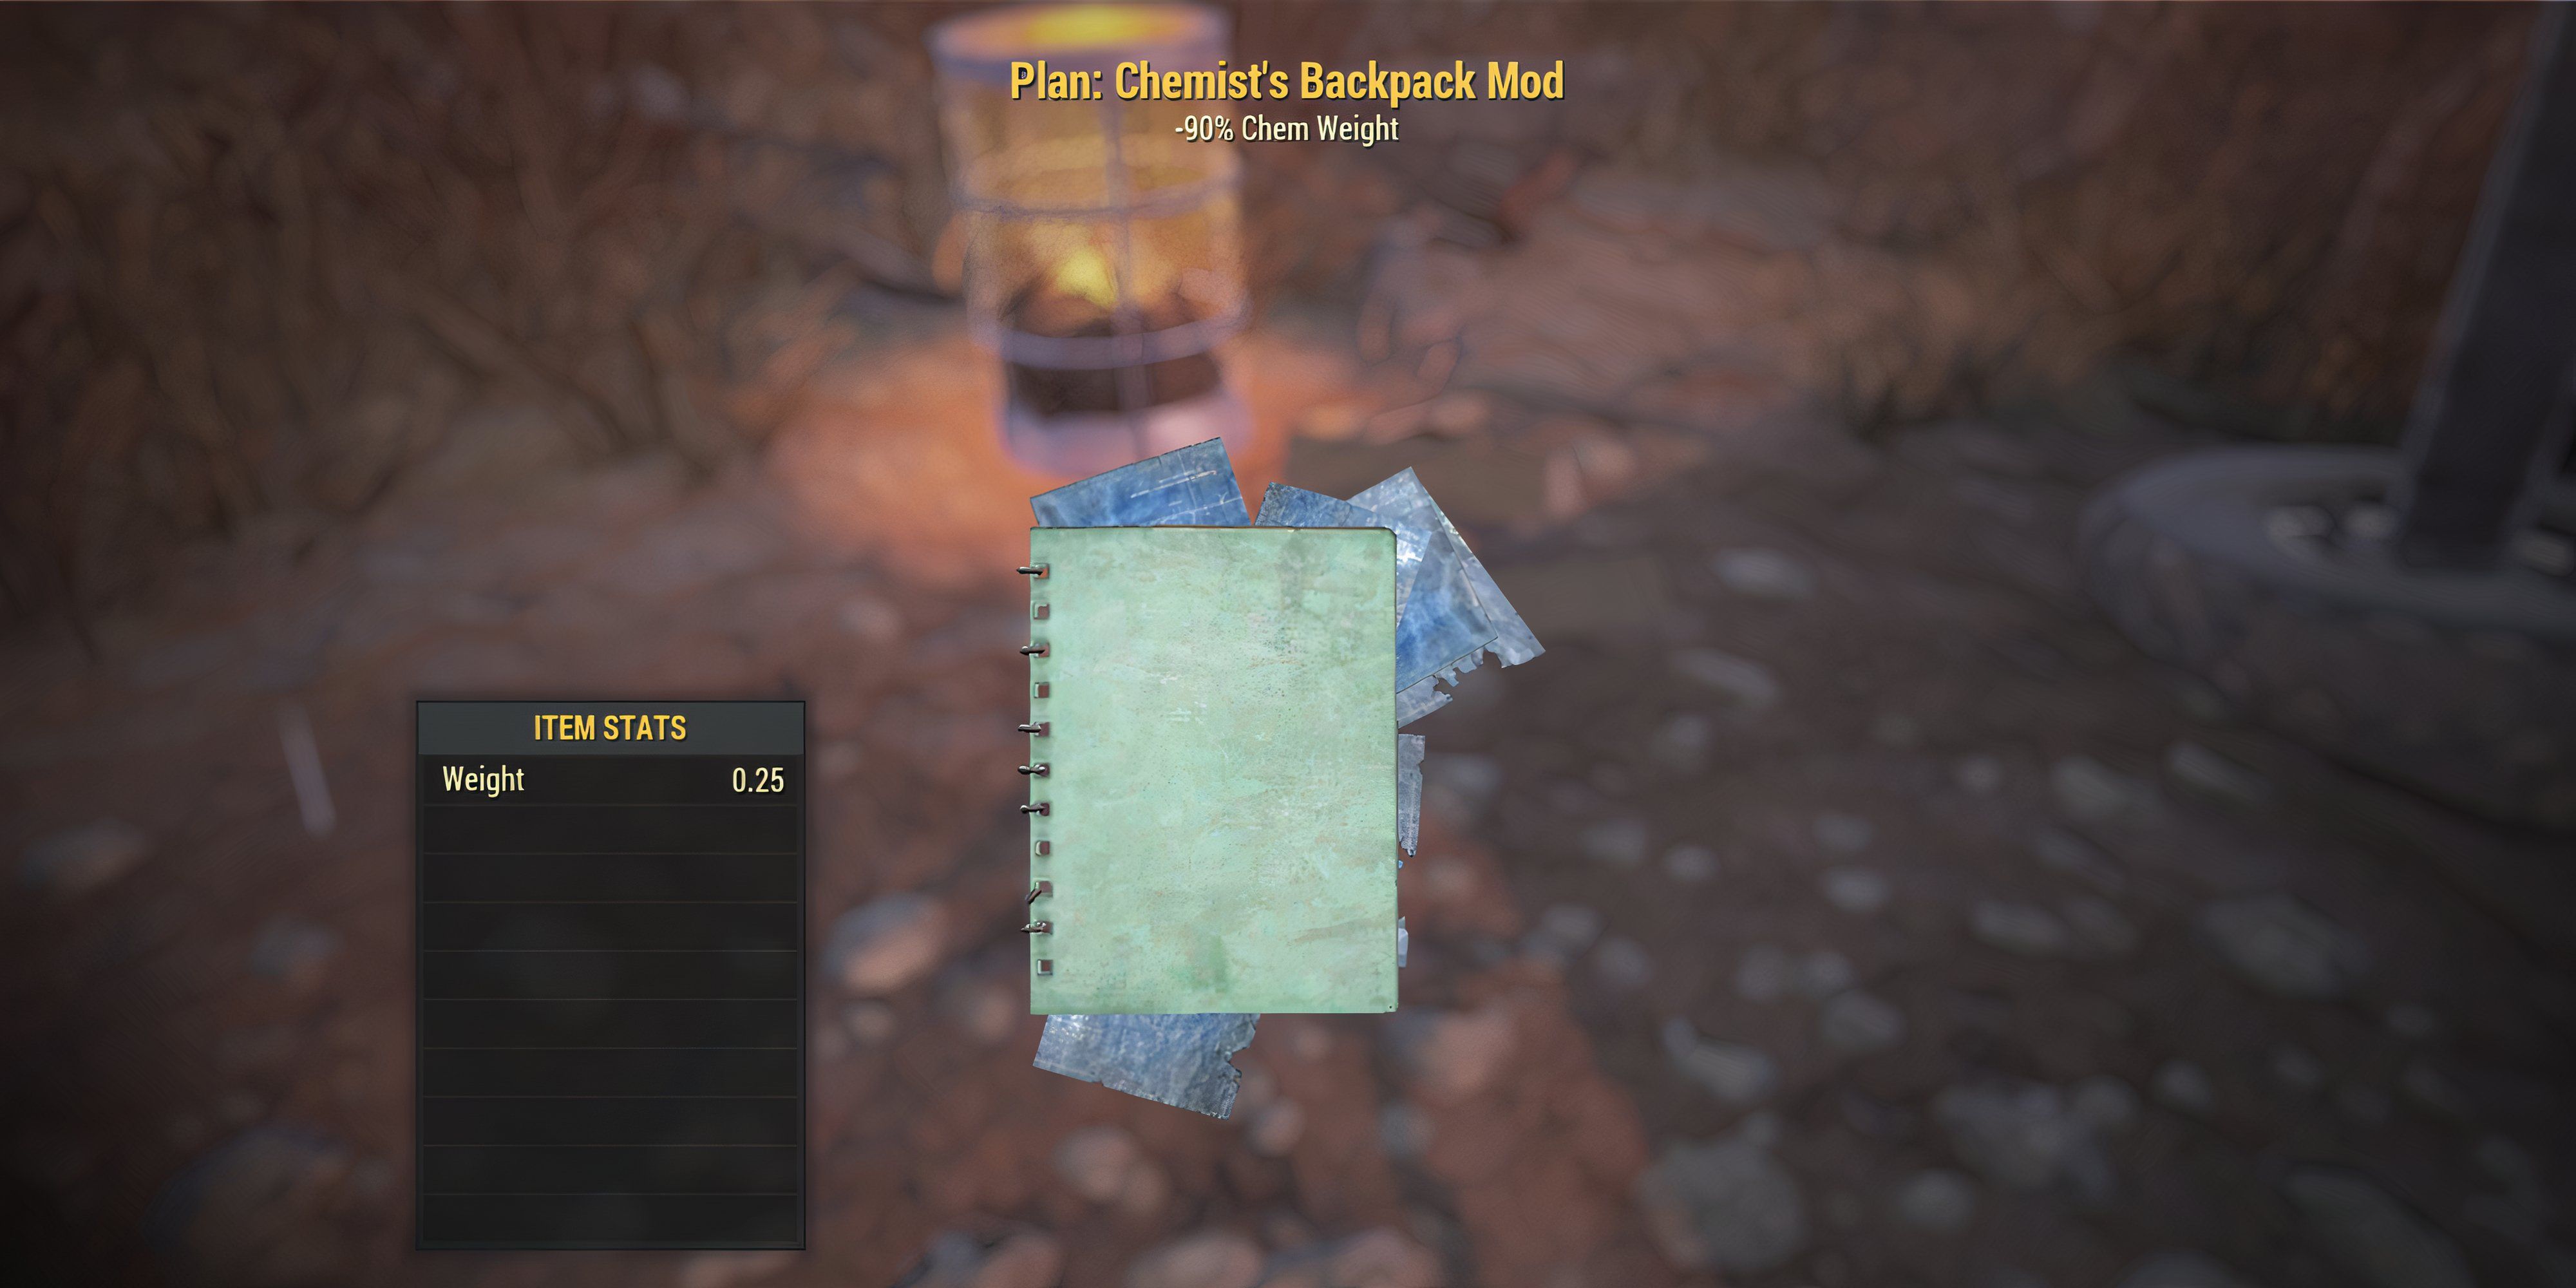 Inspecting the Plan for the Chemist's Backpack Mod in Fallout 76